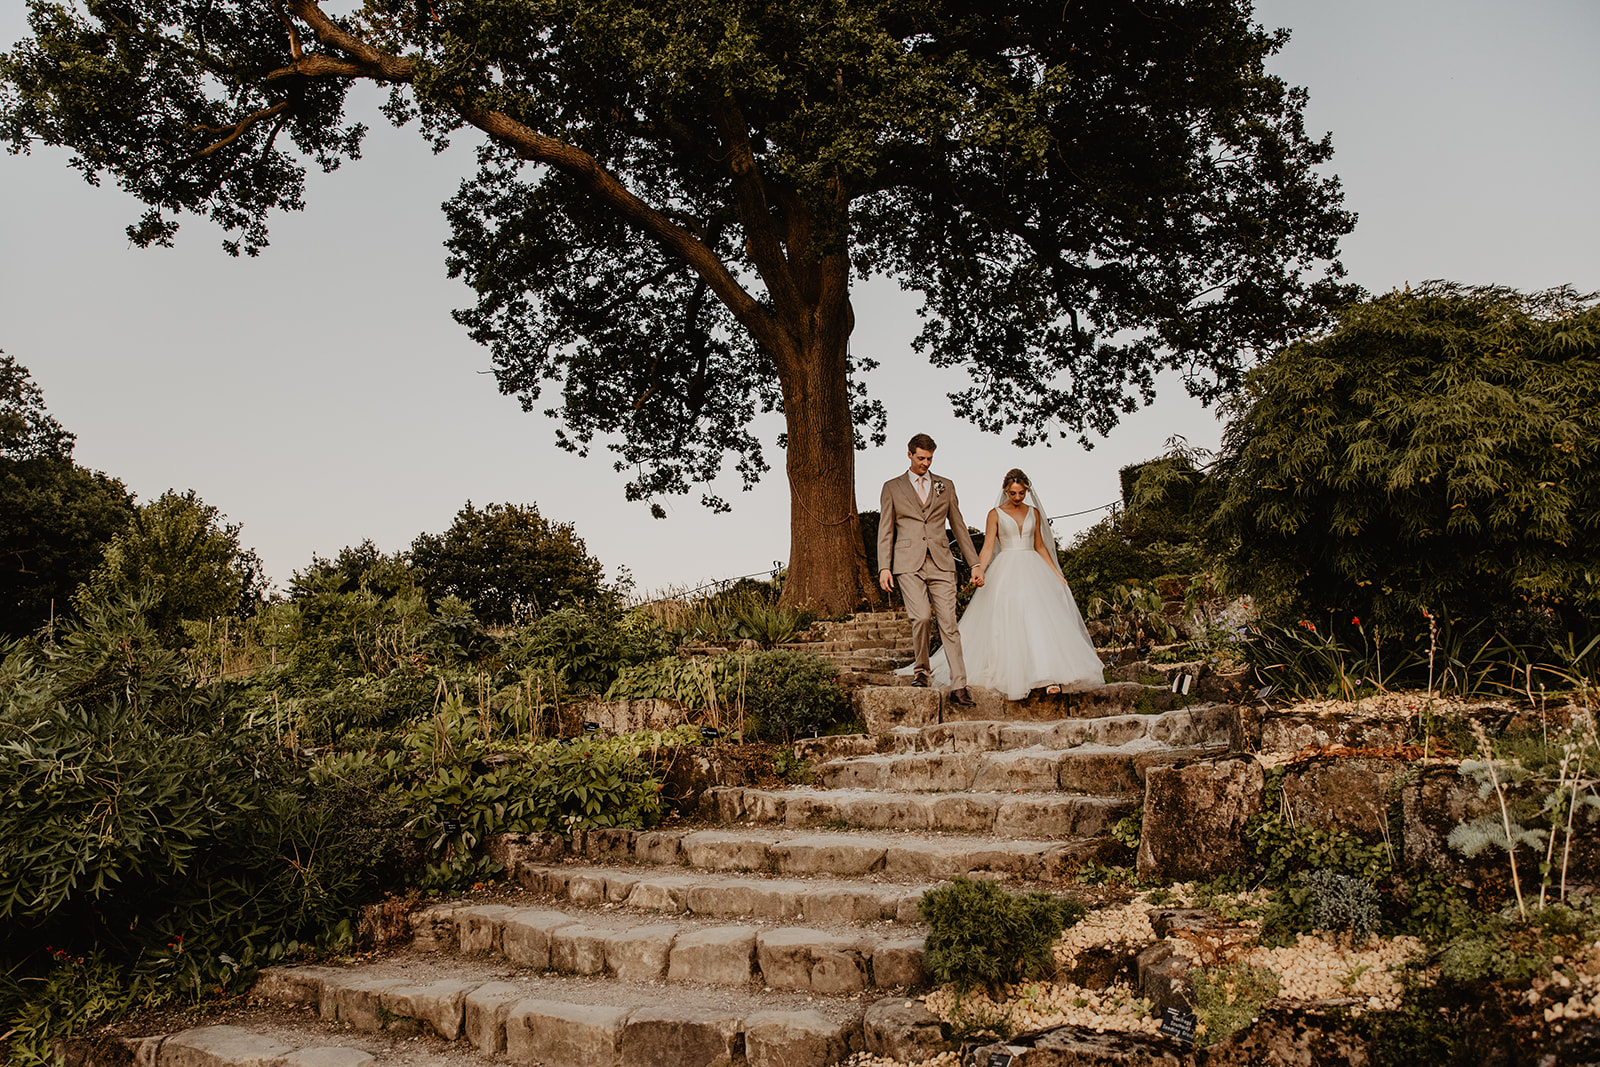 Bride and groom during golden hour at a RHS Gardens Wisley Wedding. By Olive Joy Photography